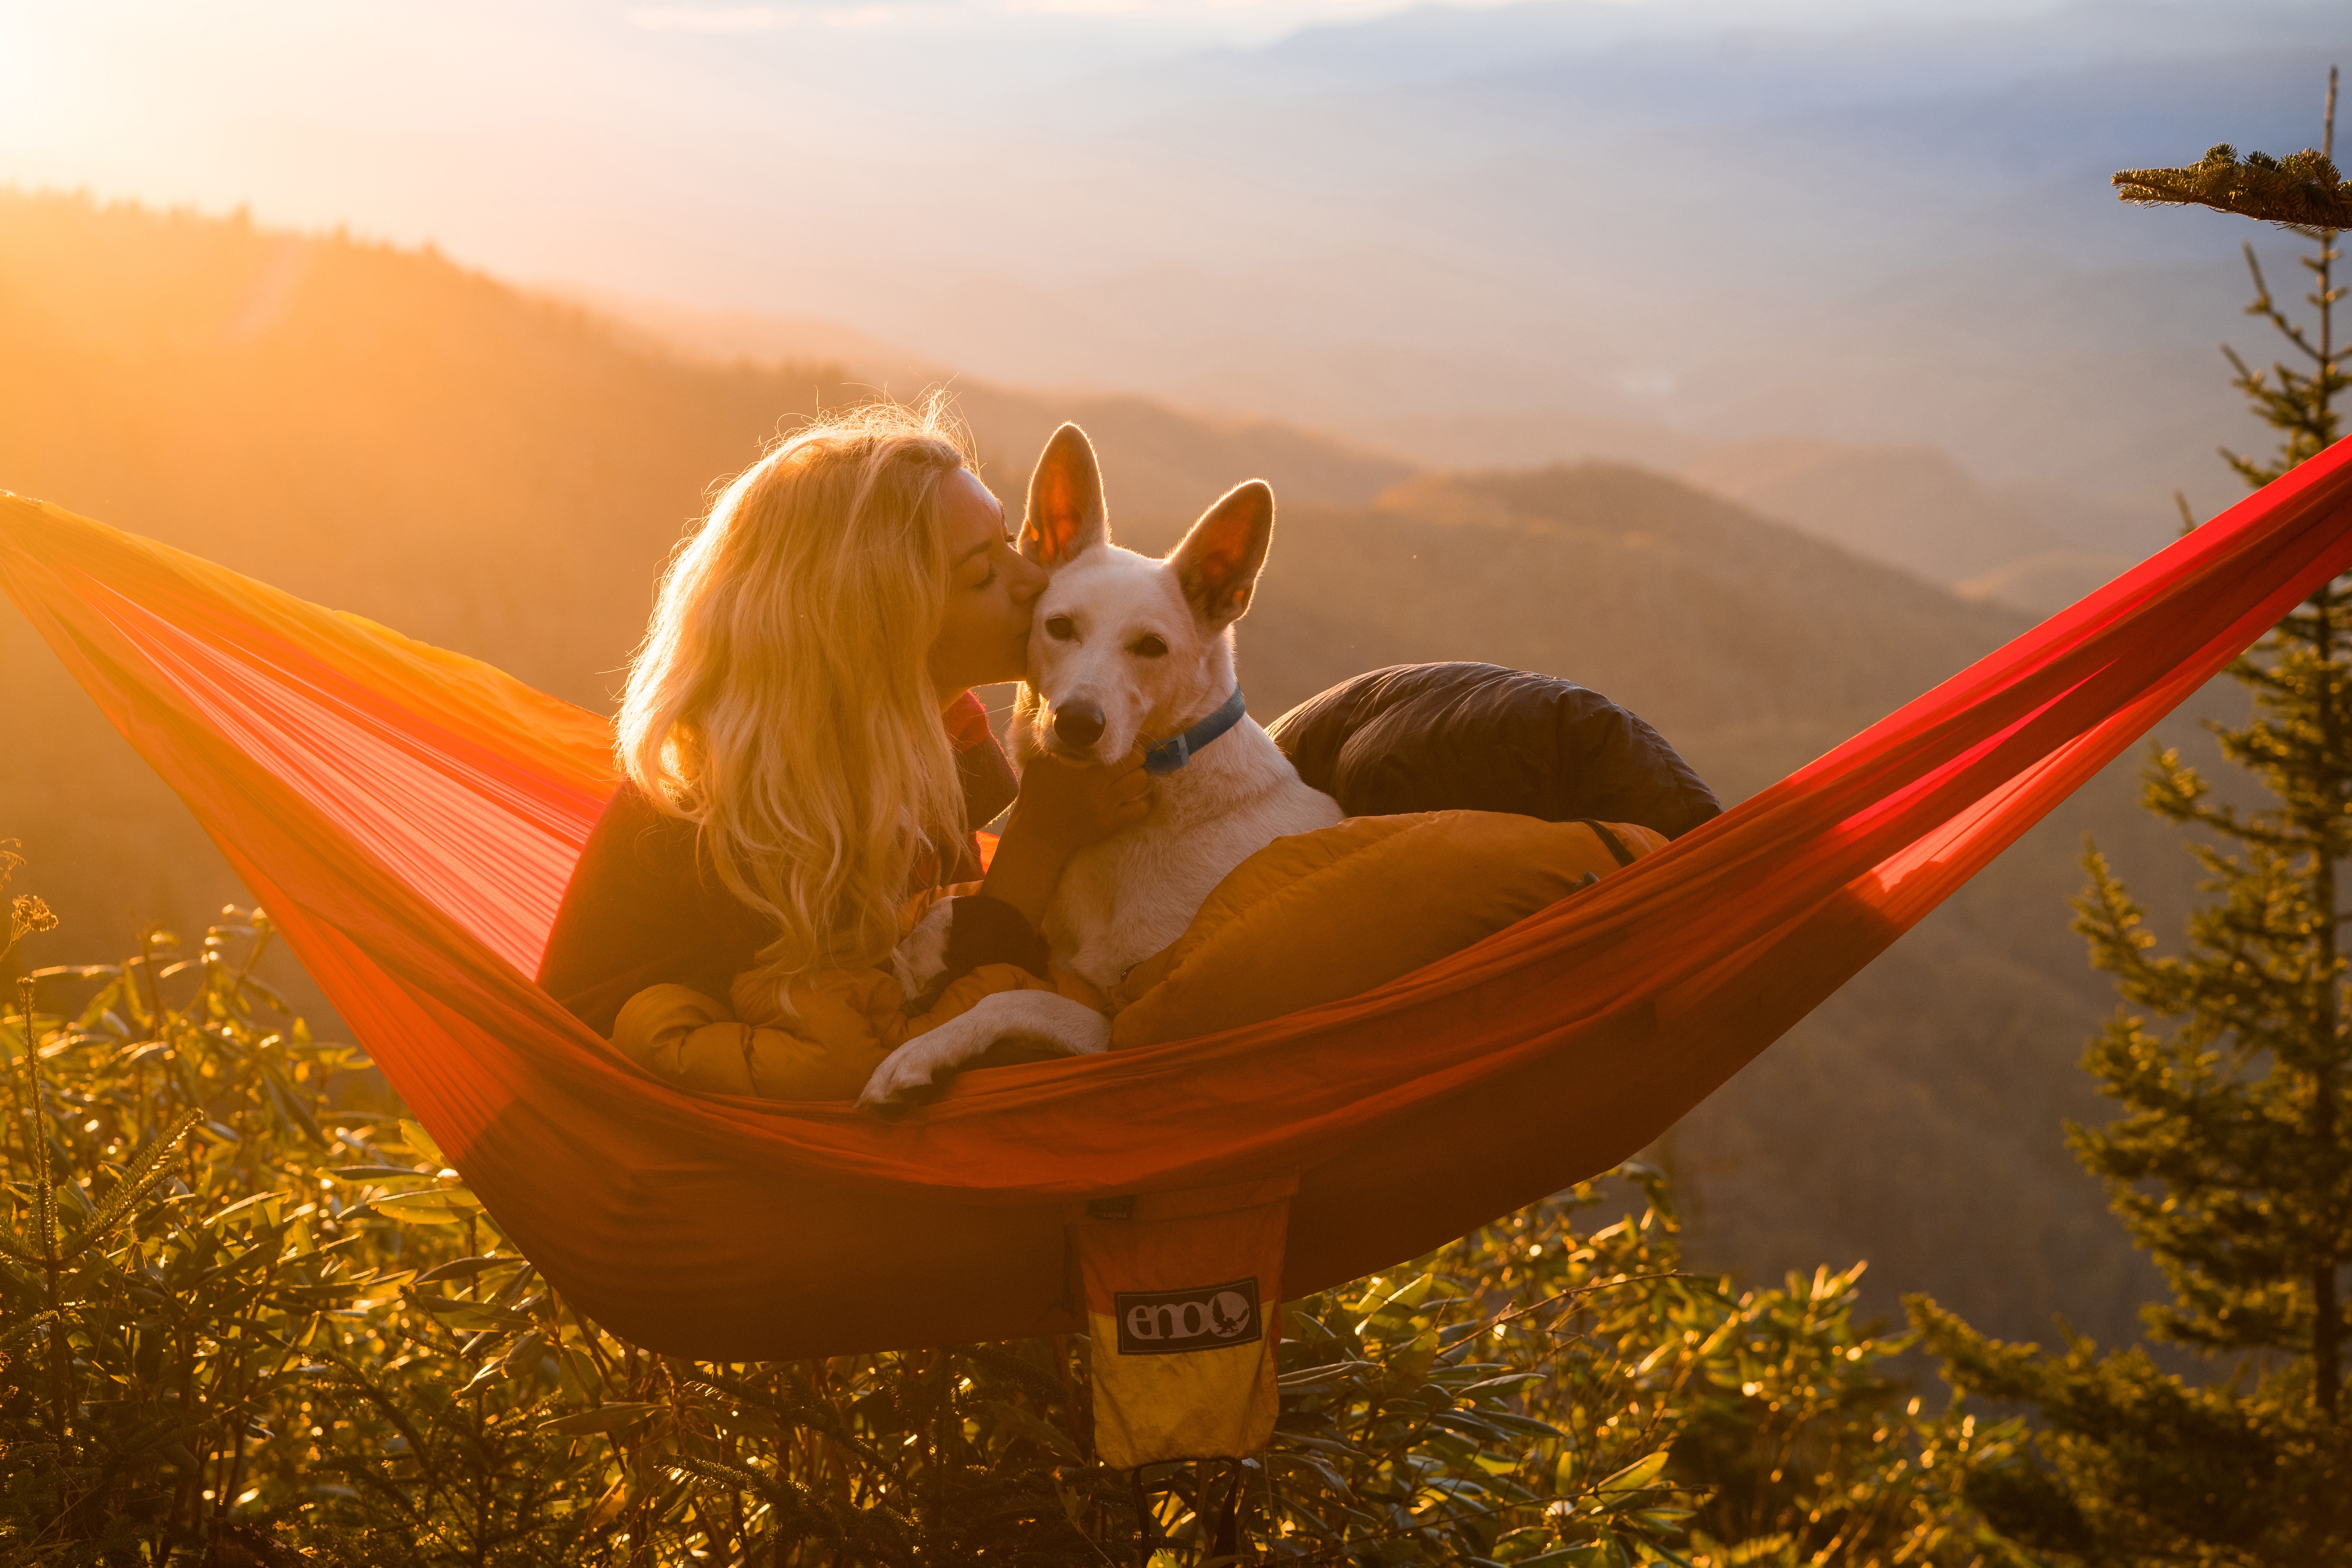 A dog and its owner relax in a hammock near the Appalachian Trail. Photo by Steven Yocom.